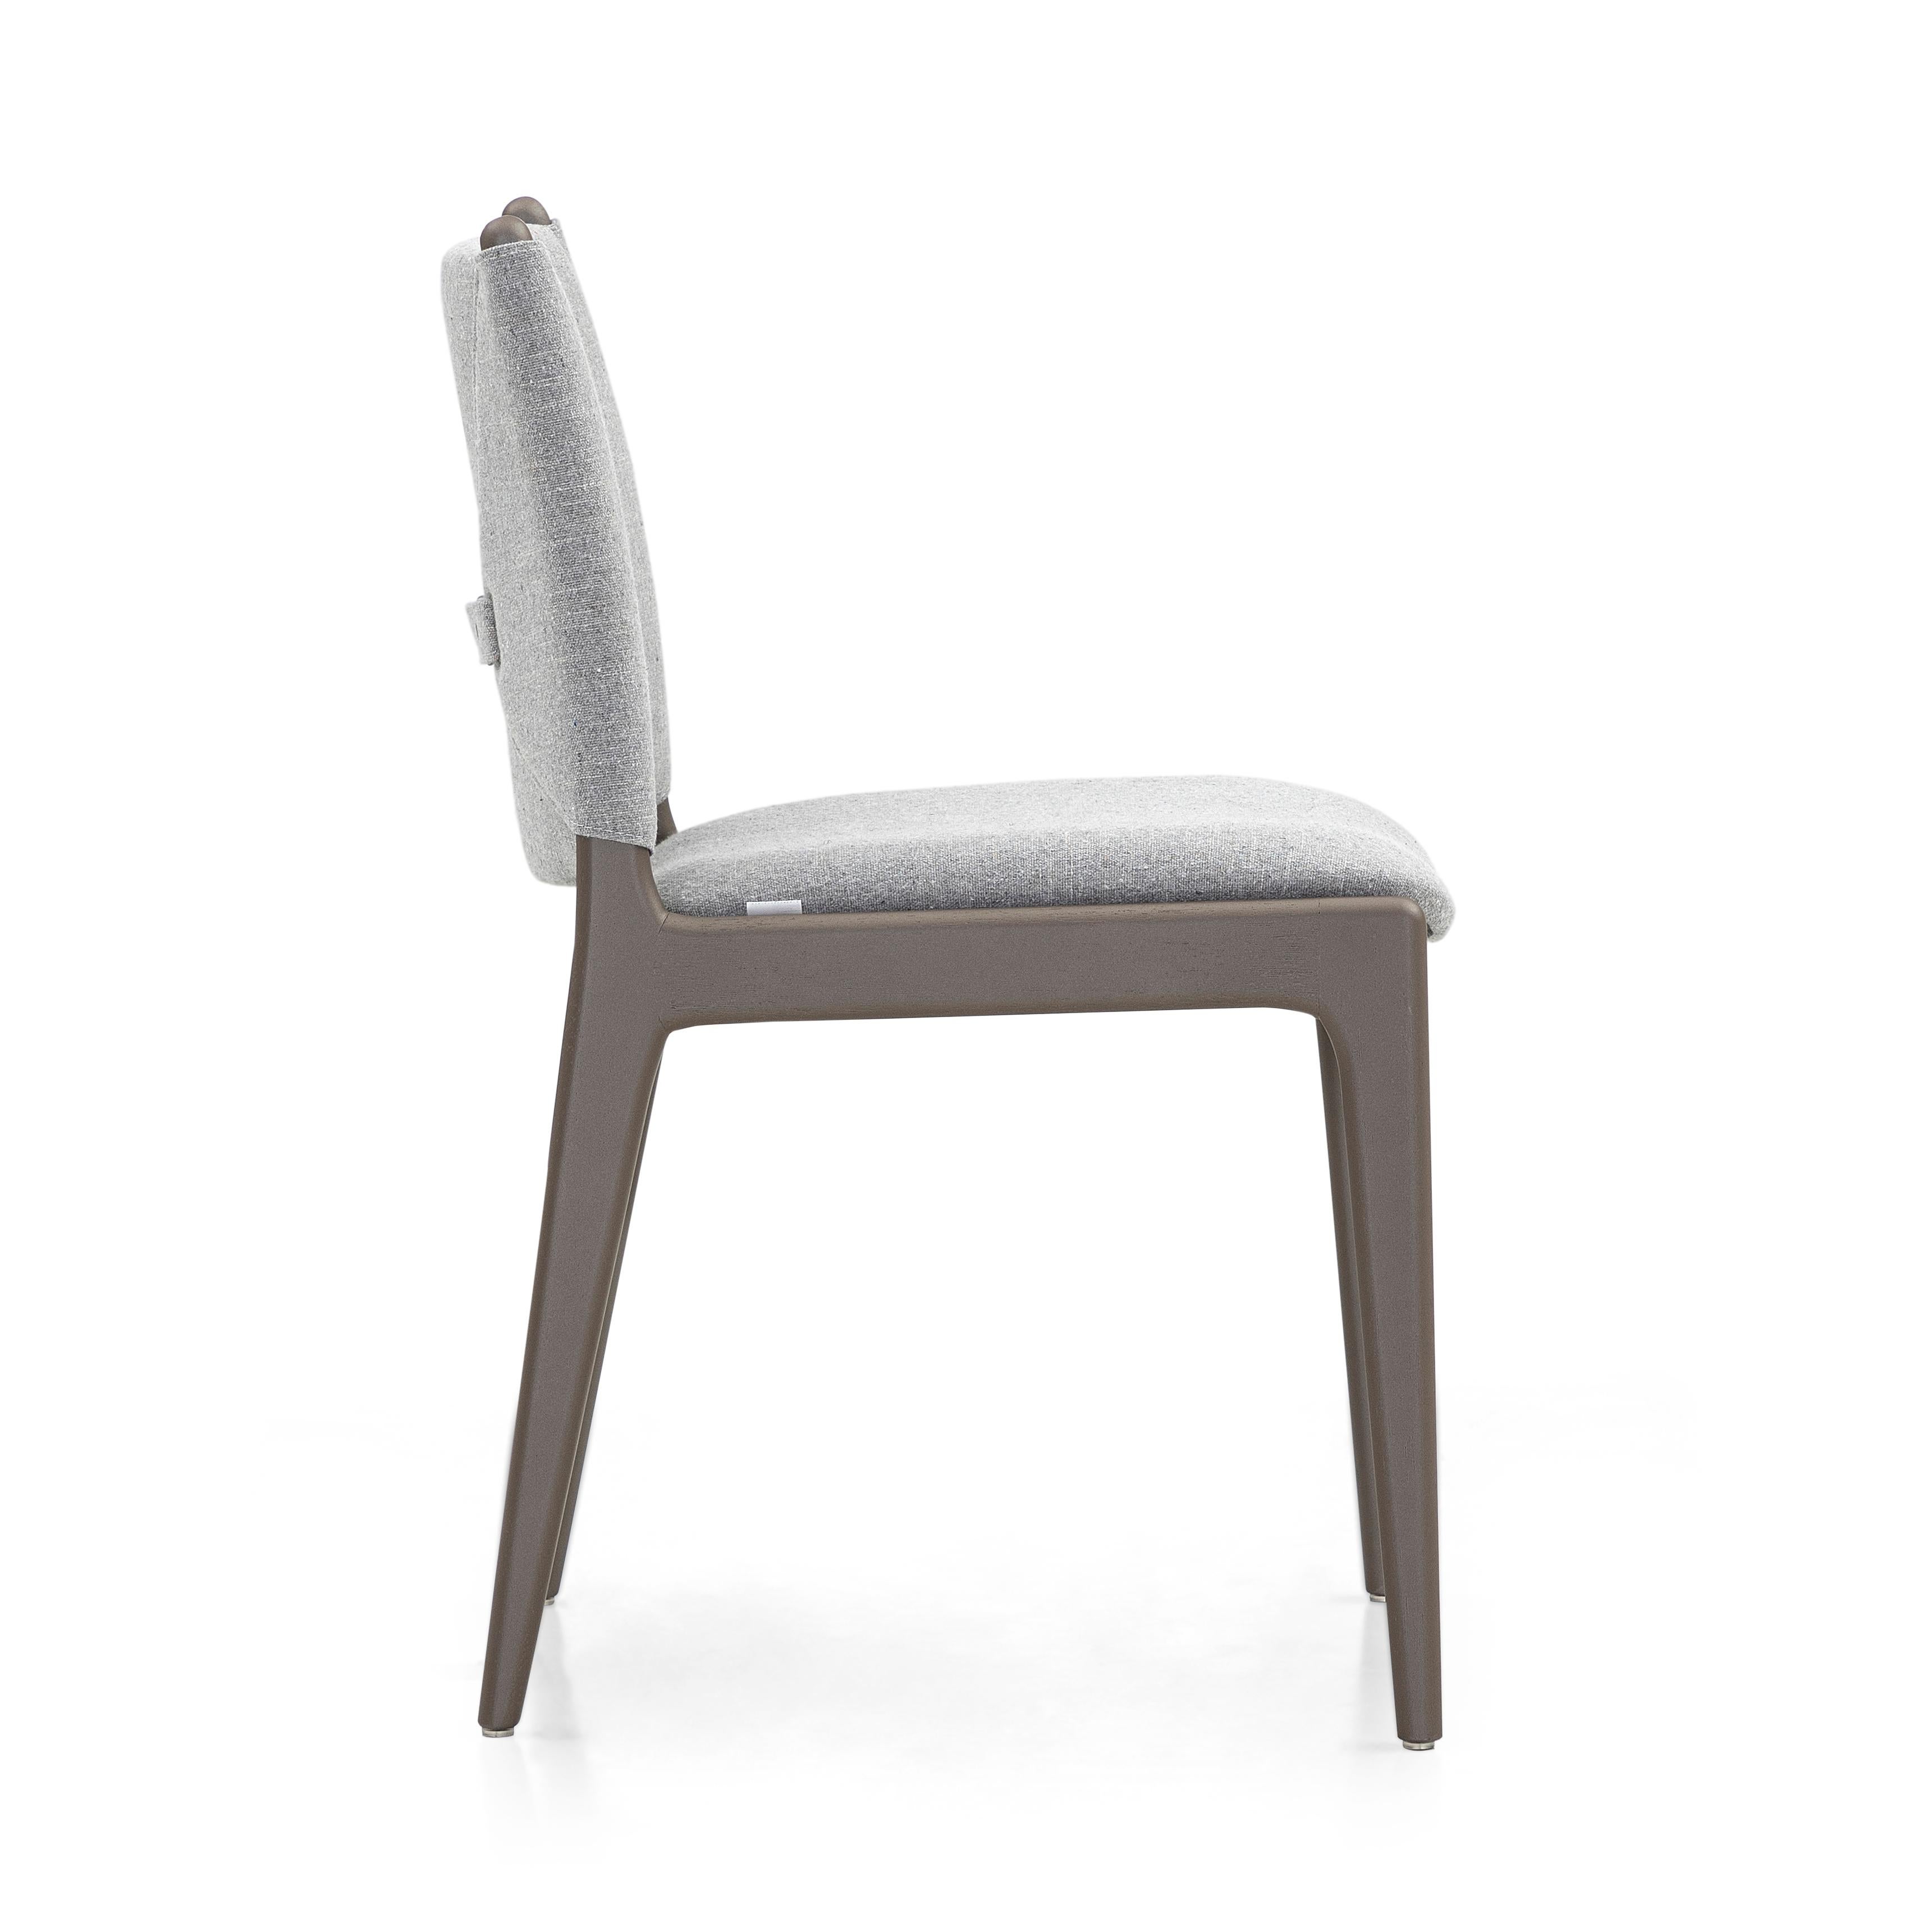 Cappio Dining Chair in Chocolate Wood Color with Gray Fabric, set of 2 In New Condition For Sale In Miami, FL